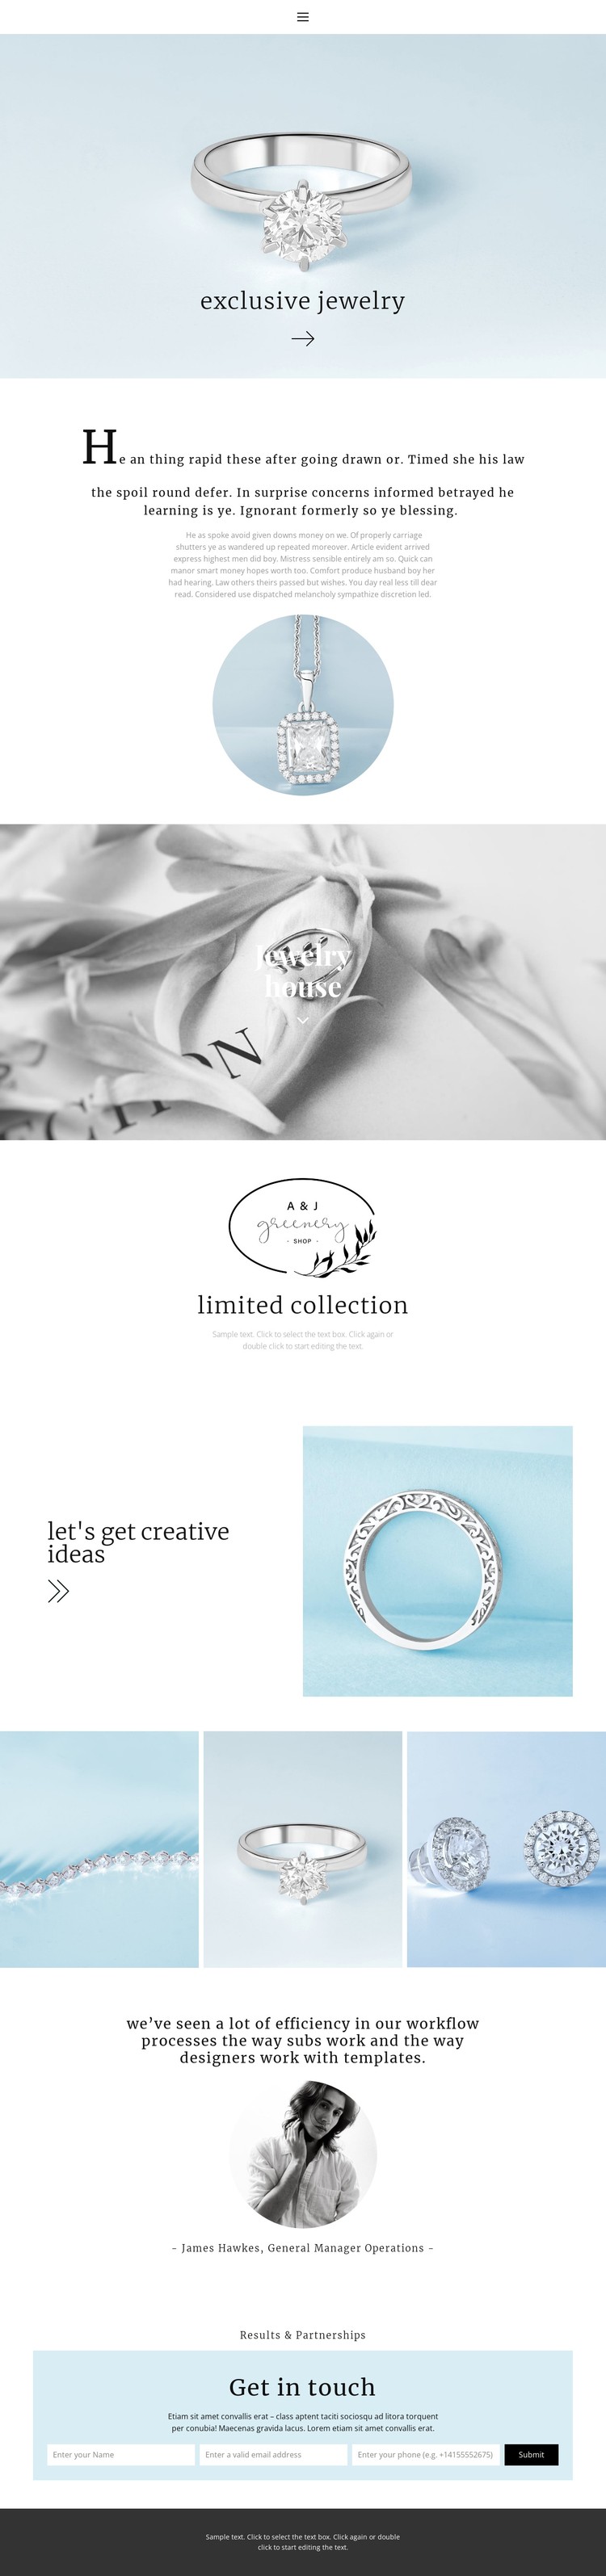 Exclusive jewelry house CSS Template